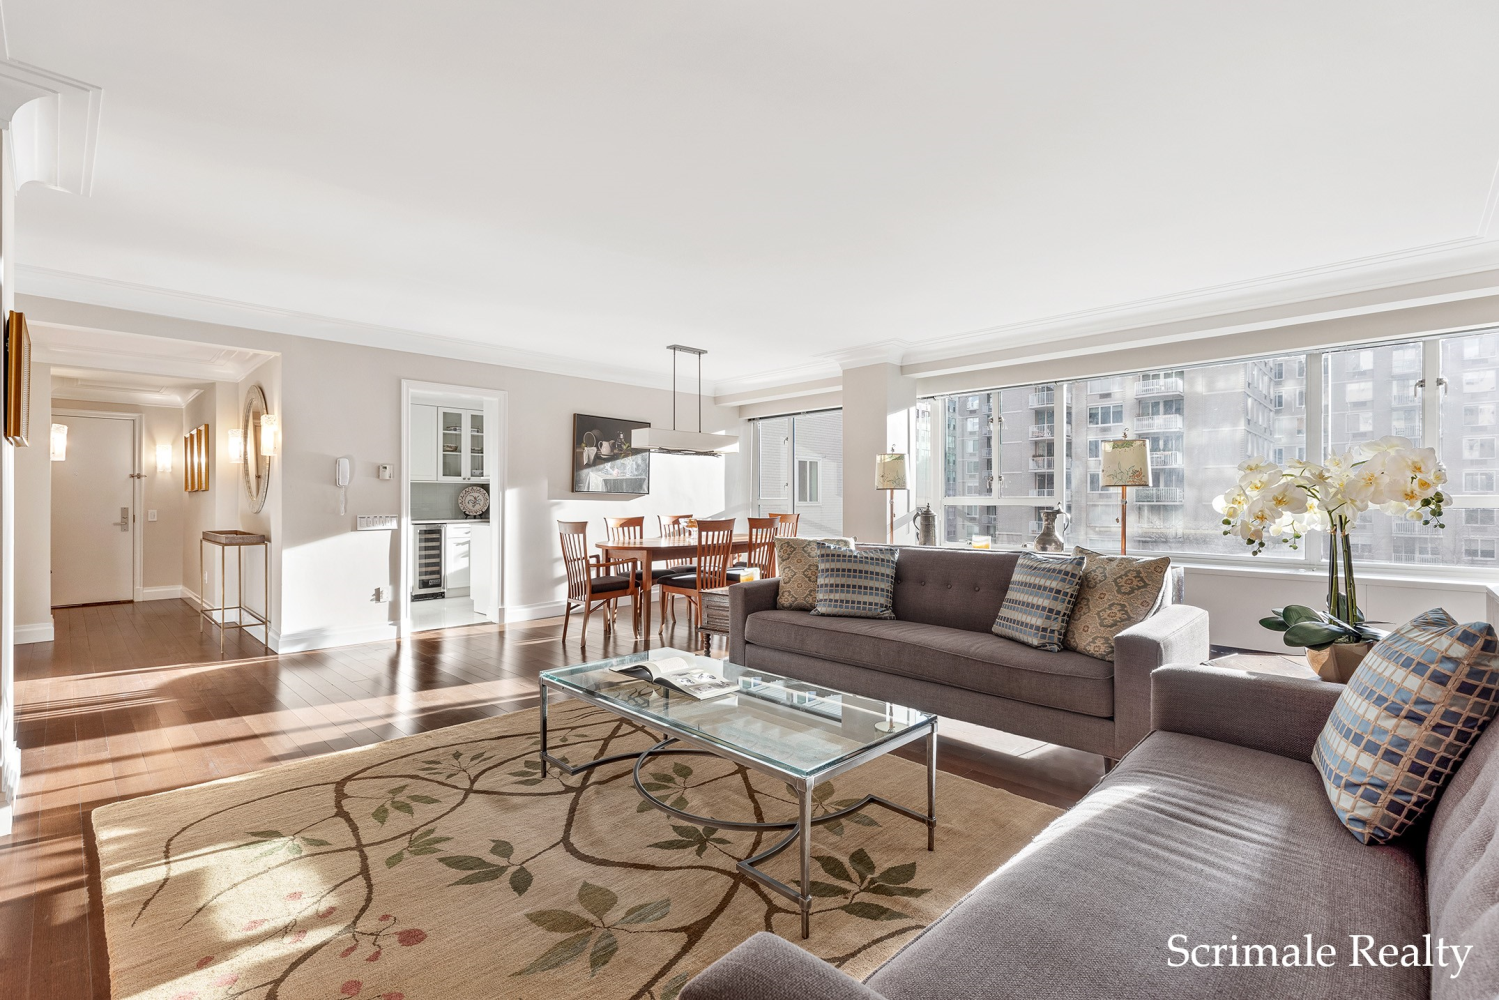 200 East 66th Street D604, Lenox Hill, Upper East Side, NYC - 2 Bedrooms  
2 Bathrooms  
4 Rooms - 